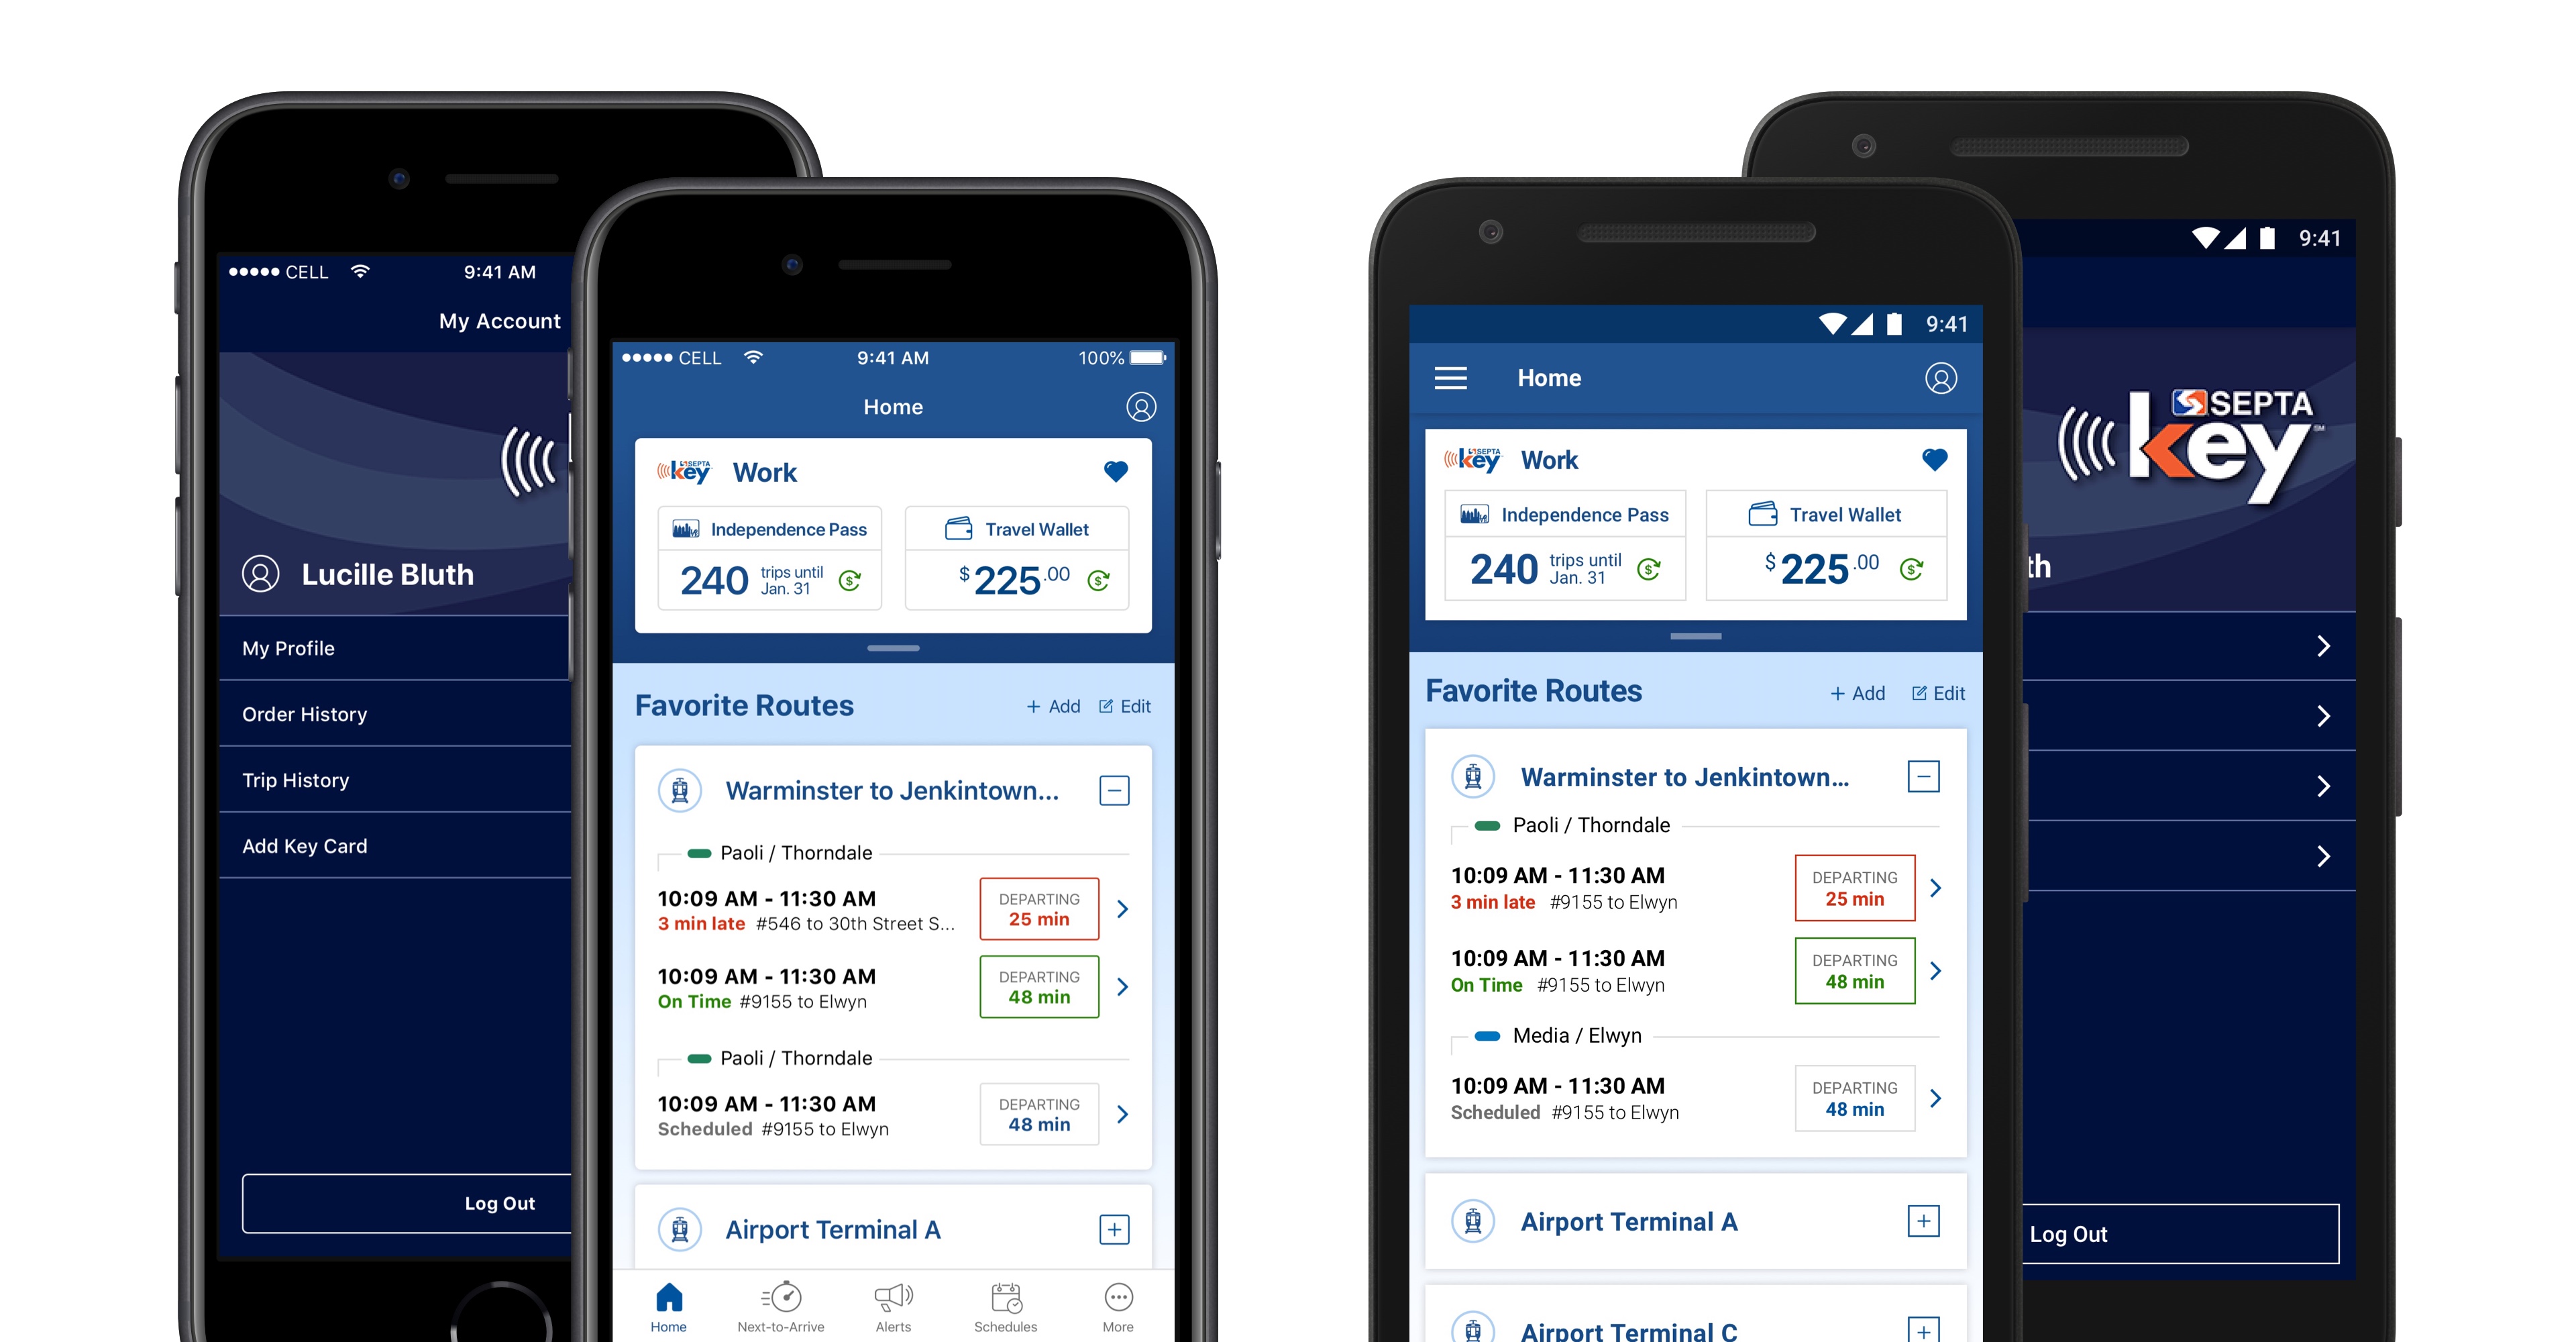 phone mockups of the SEPTA Key home and account screens on iOS and Android devices